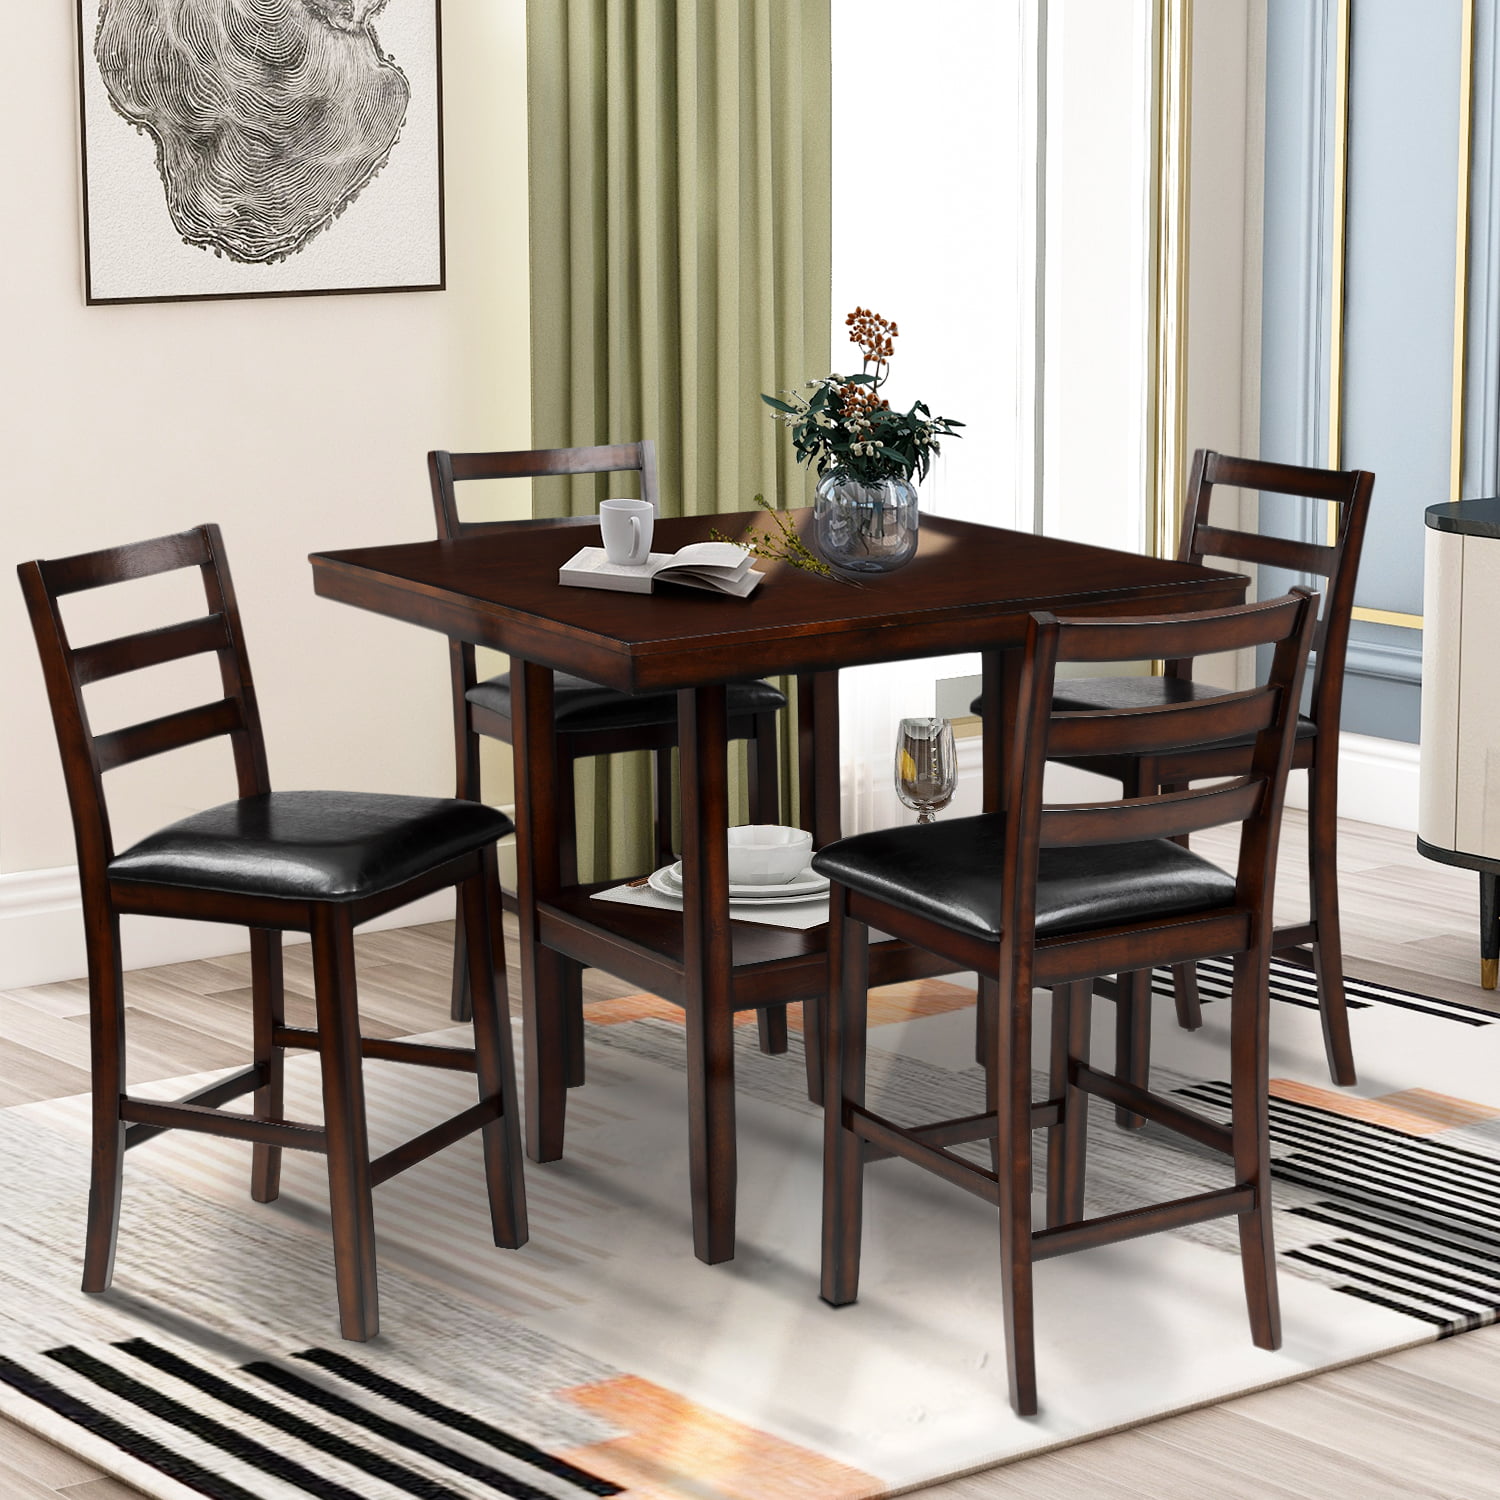 5 Piece Square Counter Height Dining Table Set, Kitchen Dining Room ...